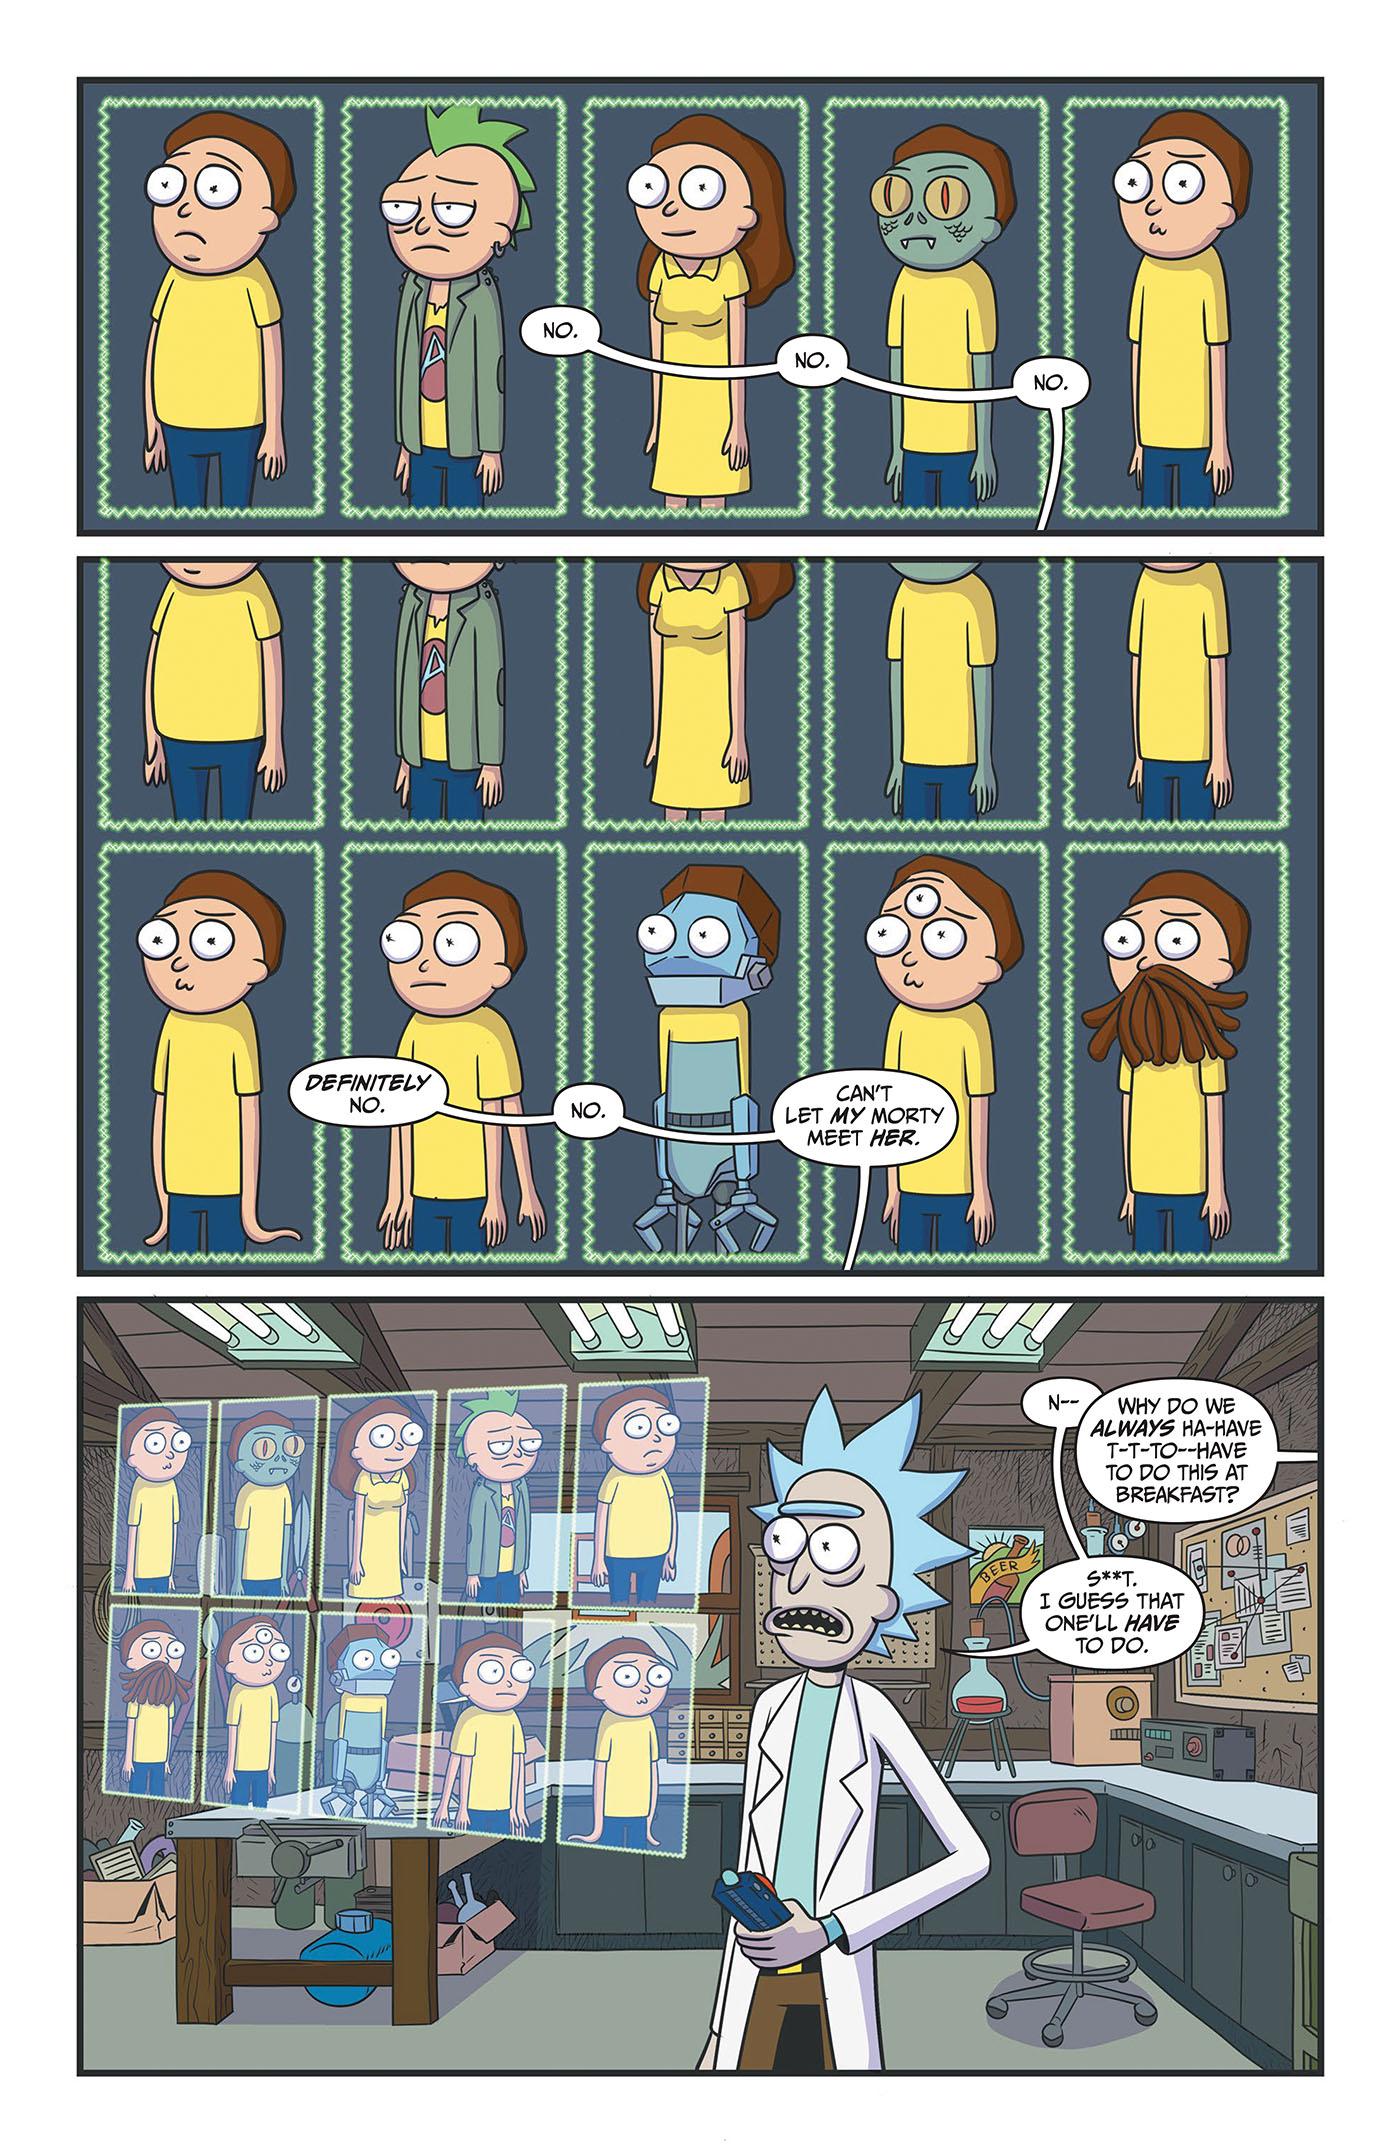 Rick and Morty Presents Mortys Run #1 Cover A Puste